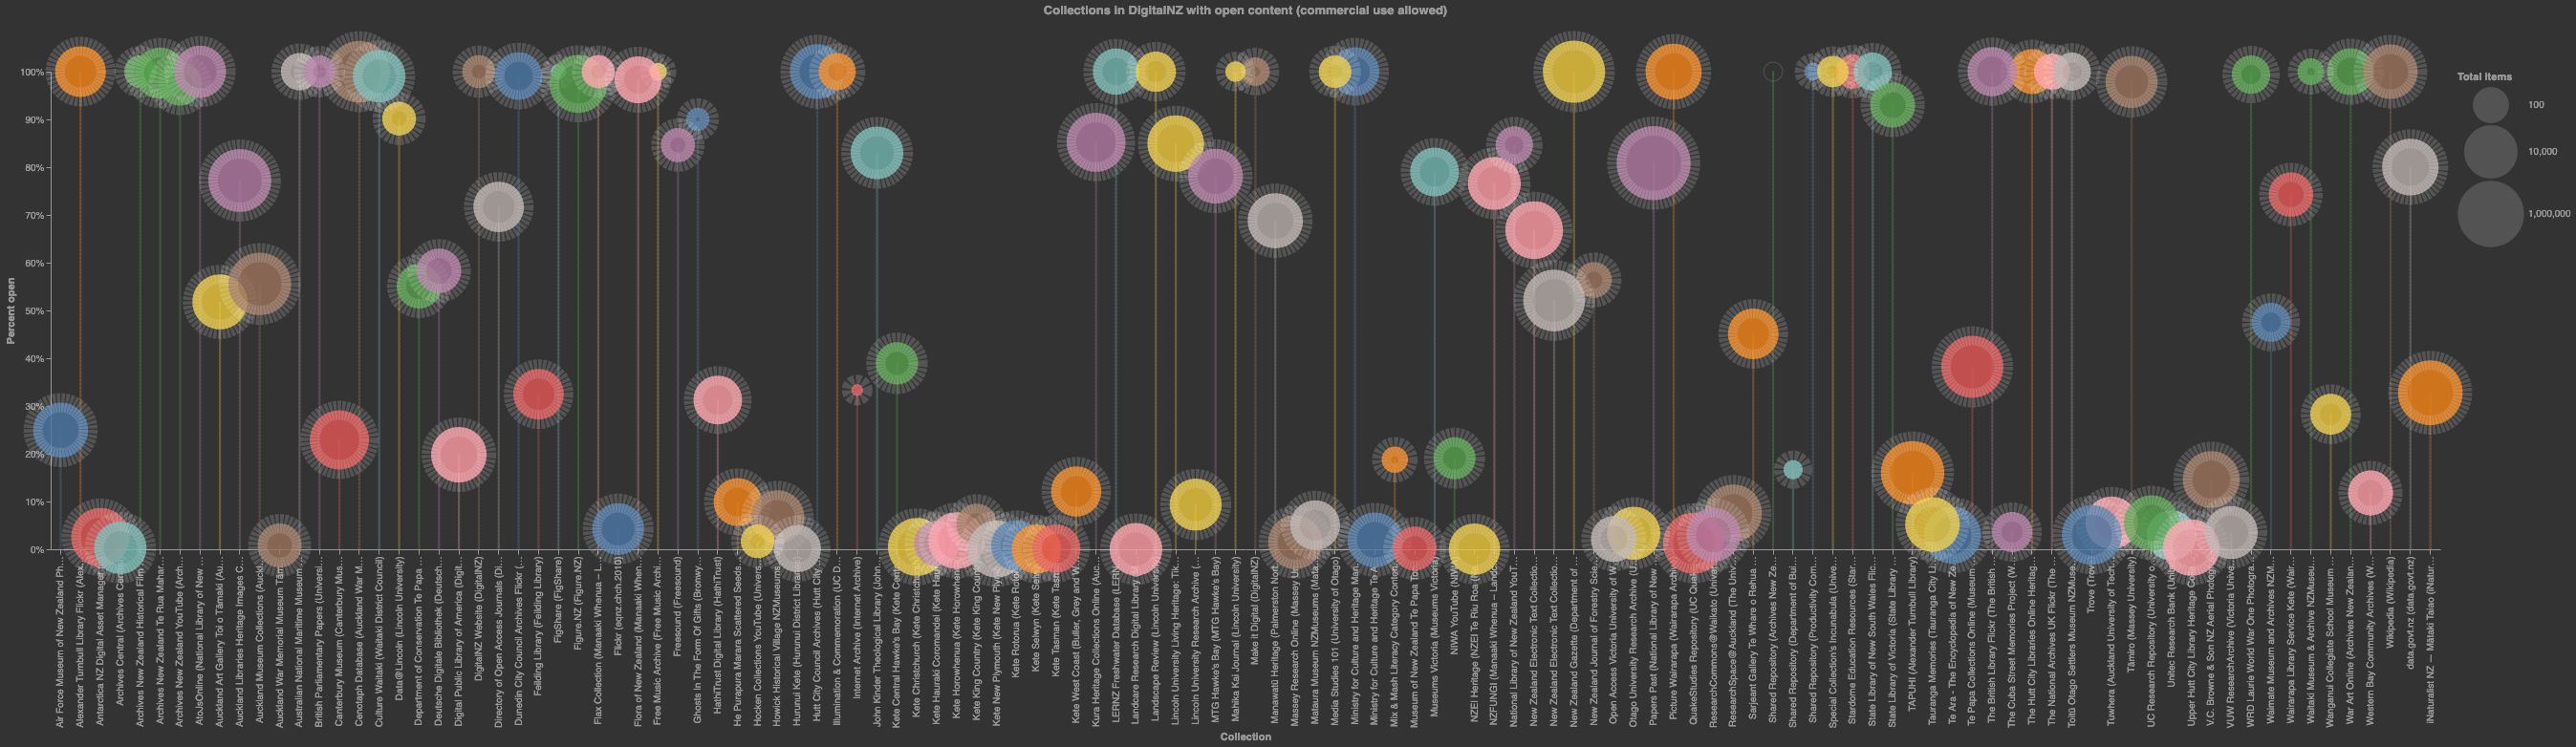 Visualisation of collections with open content in DigitalNZ